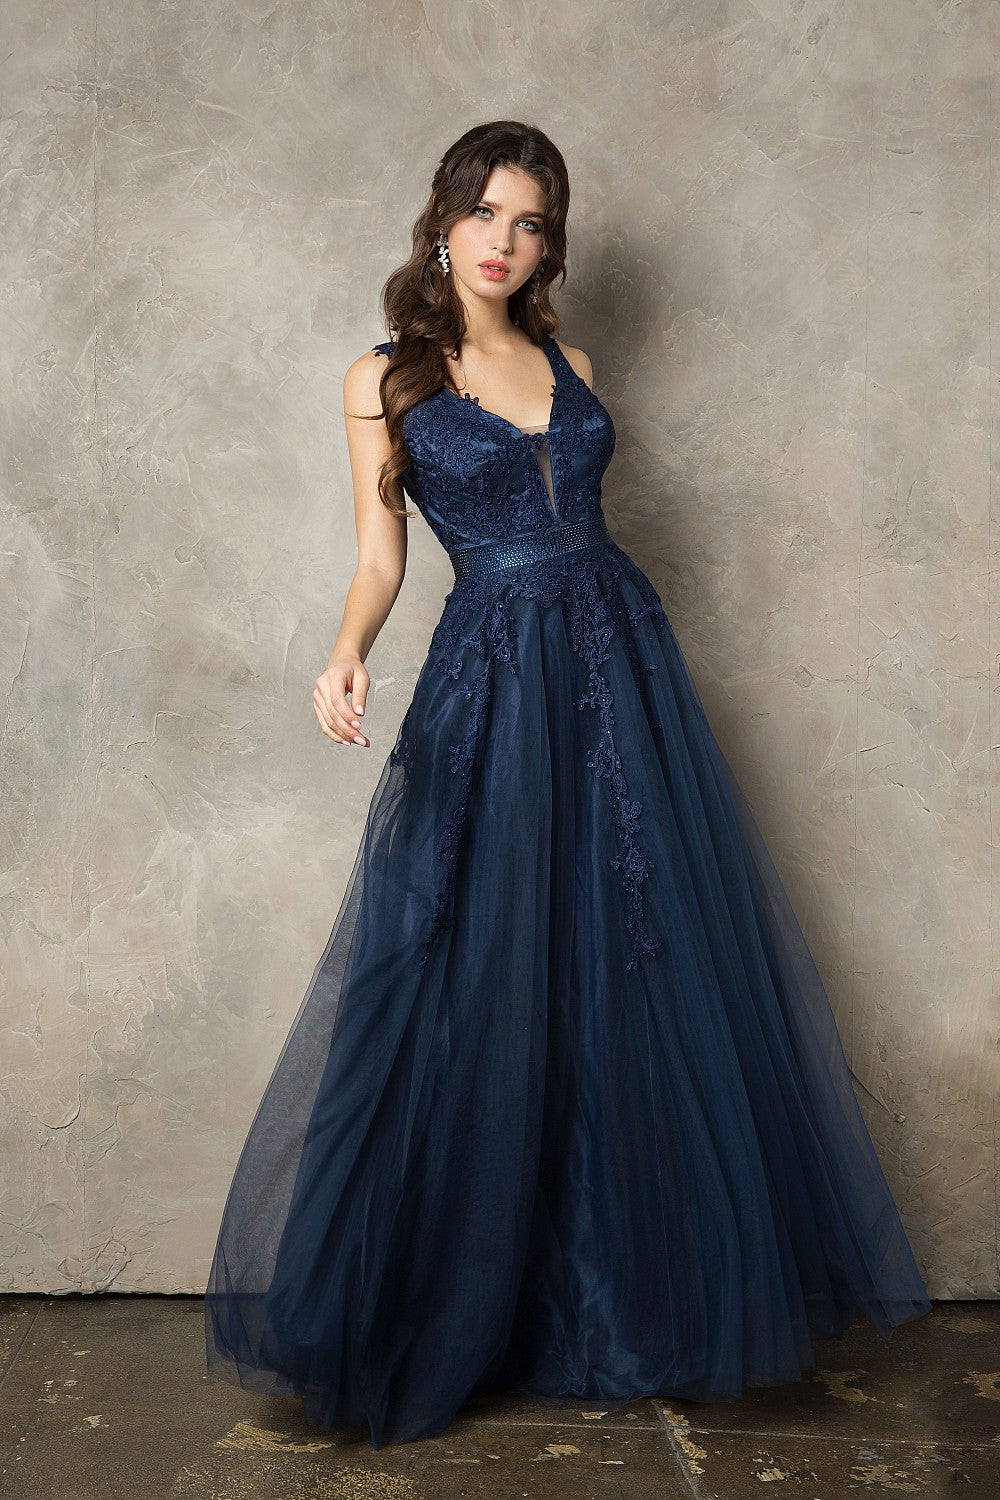 Floral Applique Sleeveless A-line Tulle Gown by Juno 0950